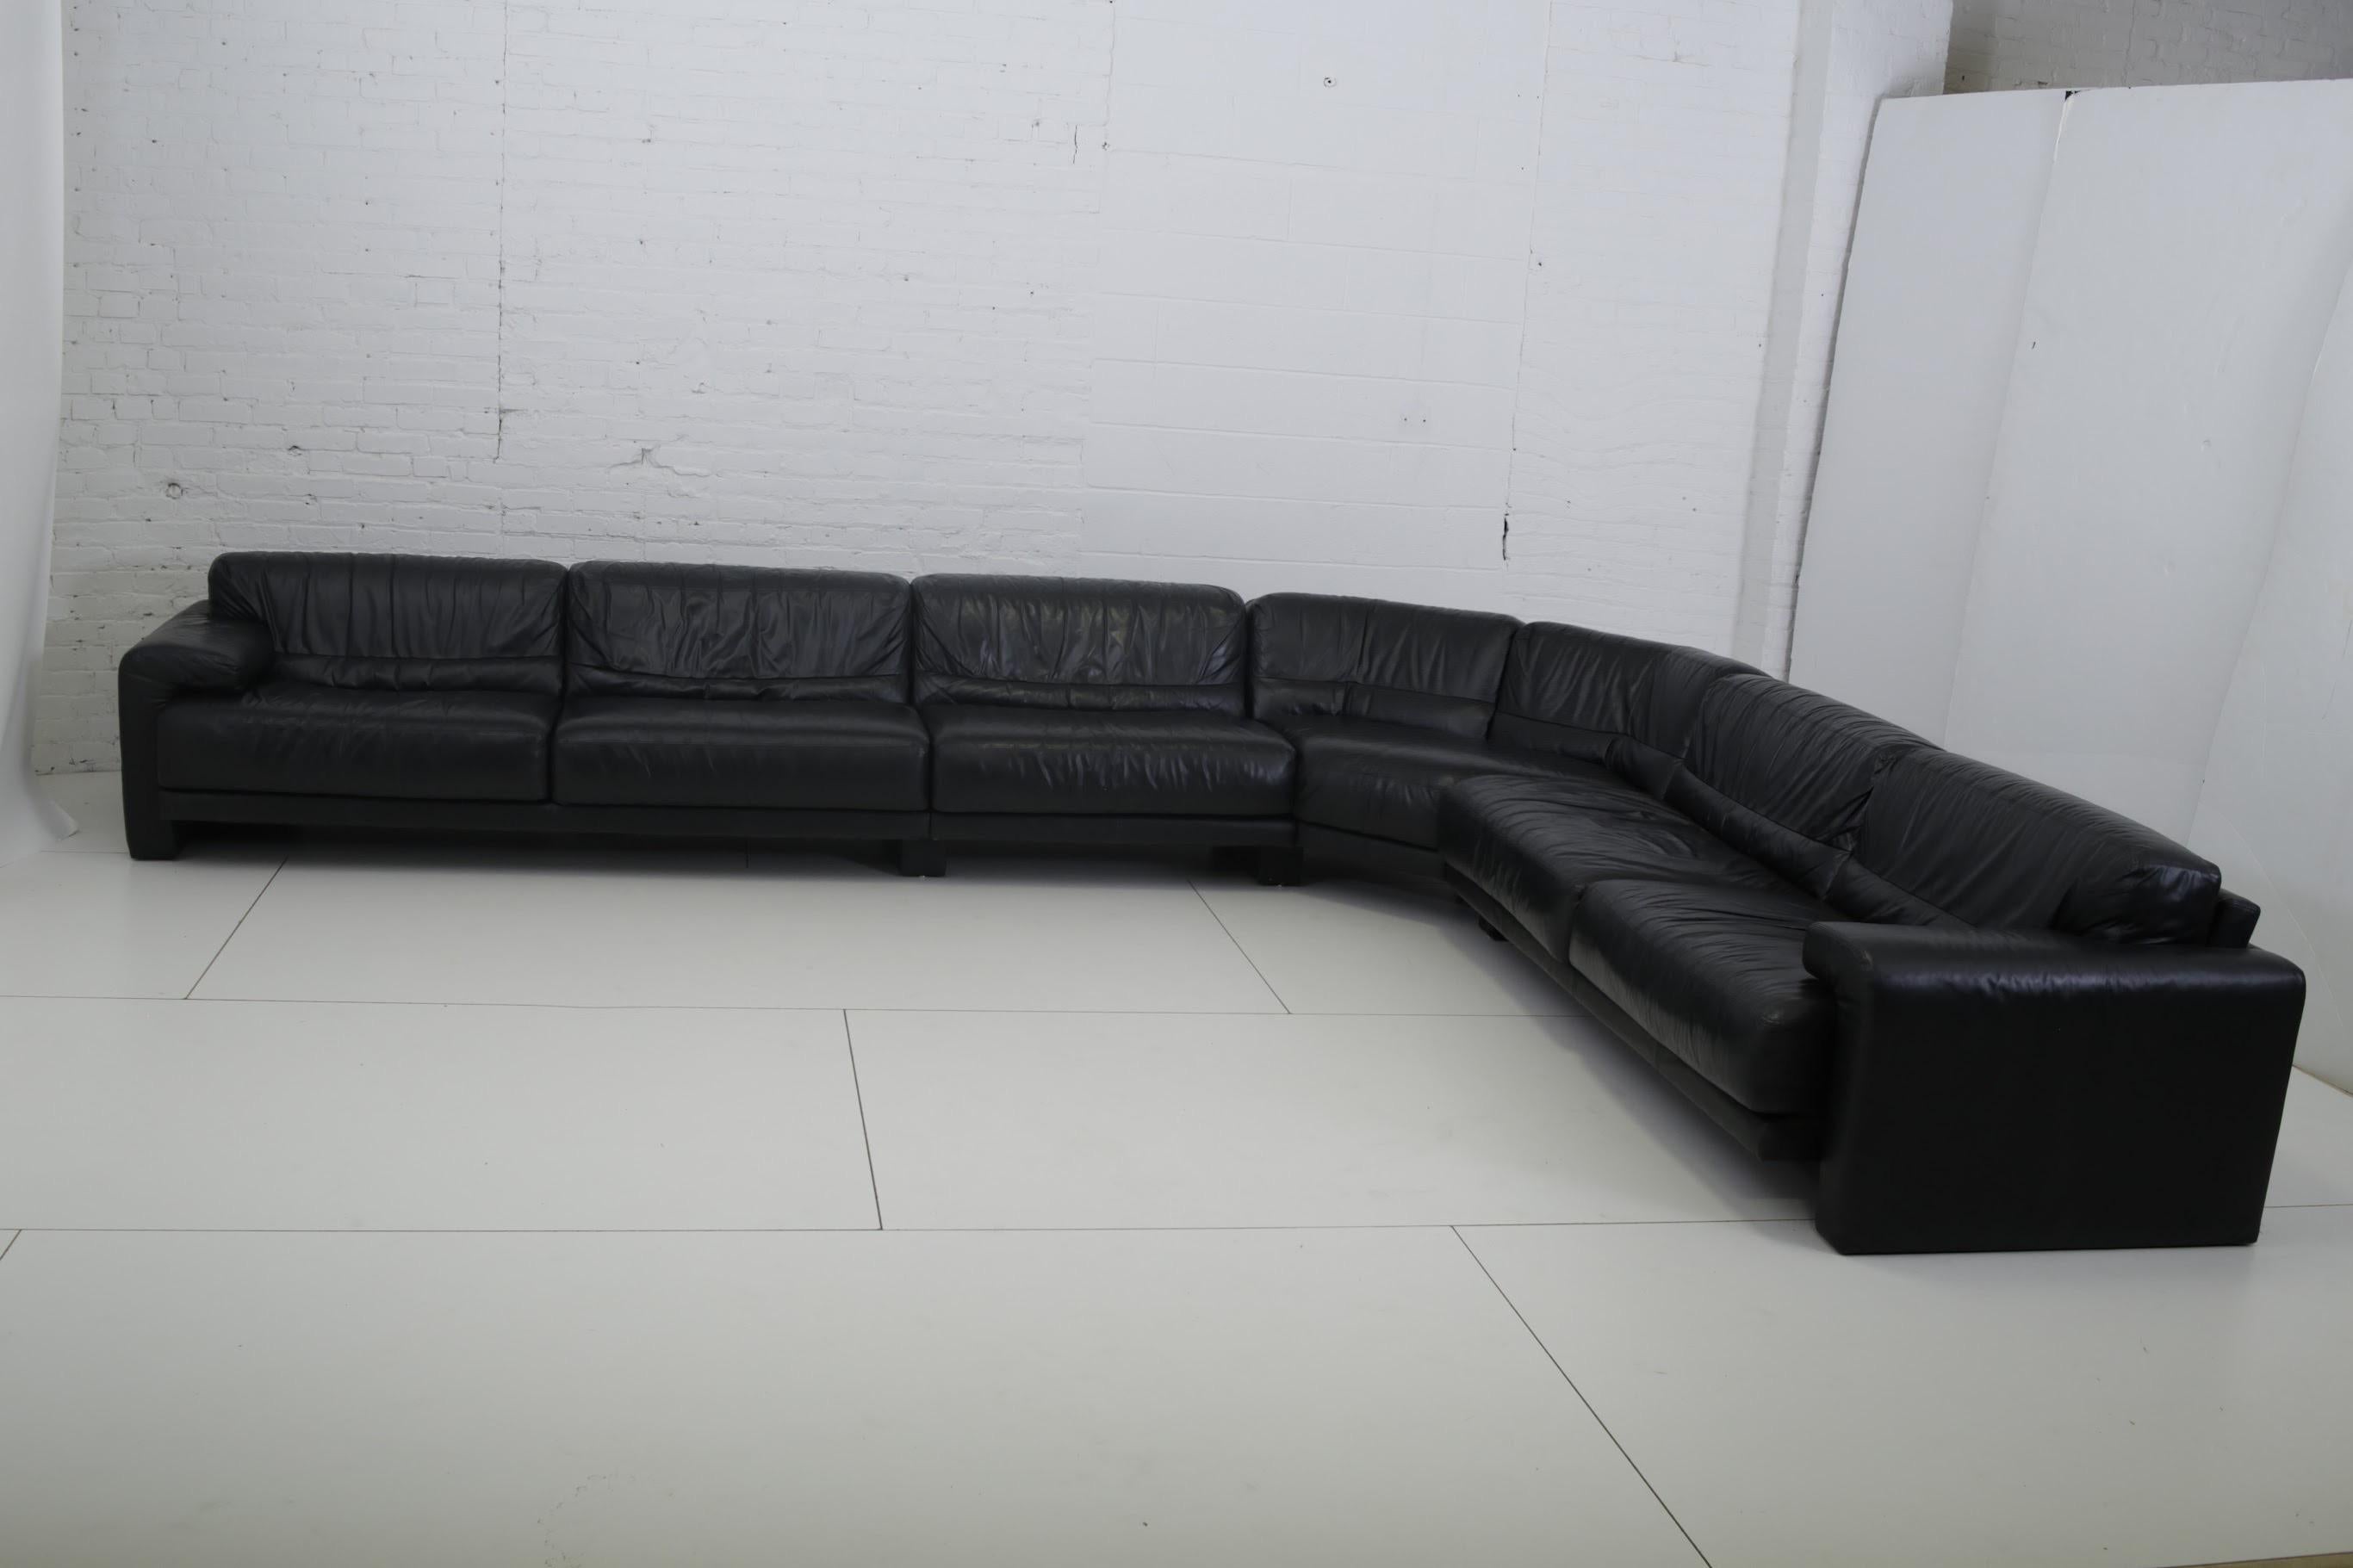 American Leather Sectional “Midday Sofa” by Preview